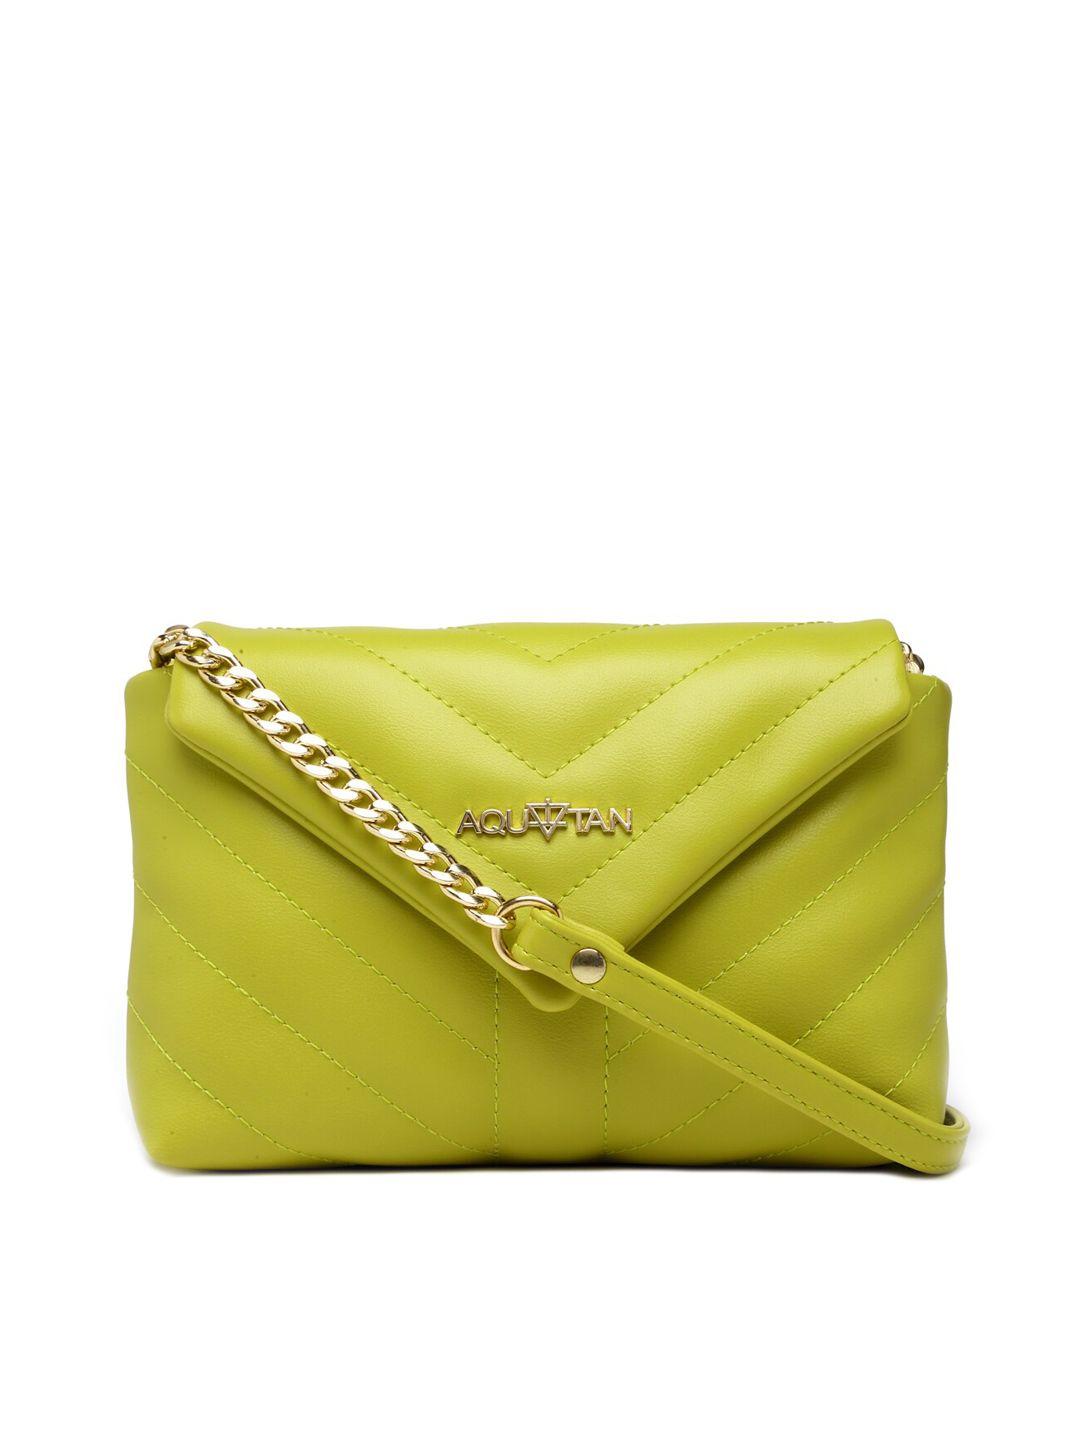 aquatan pu structured envelope shaped sling bag with quilted